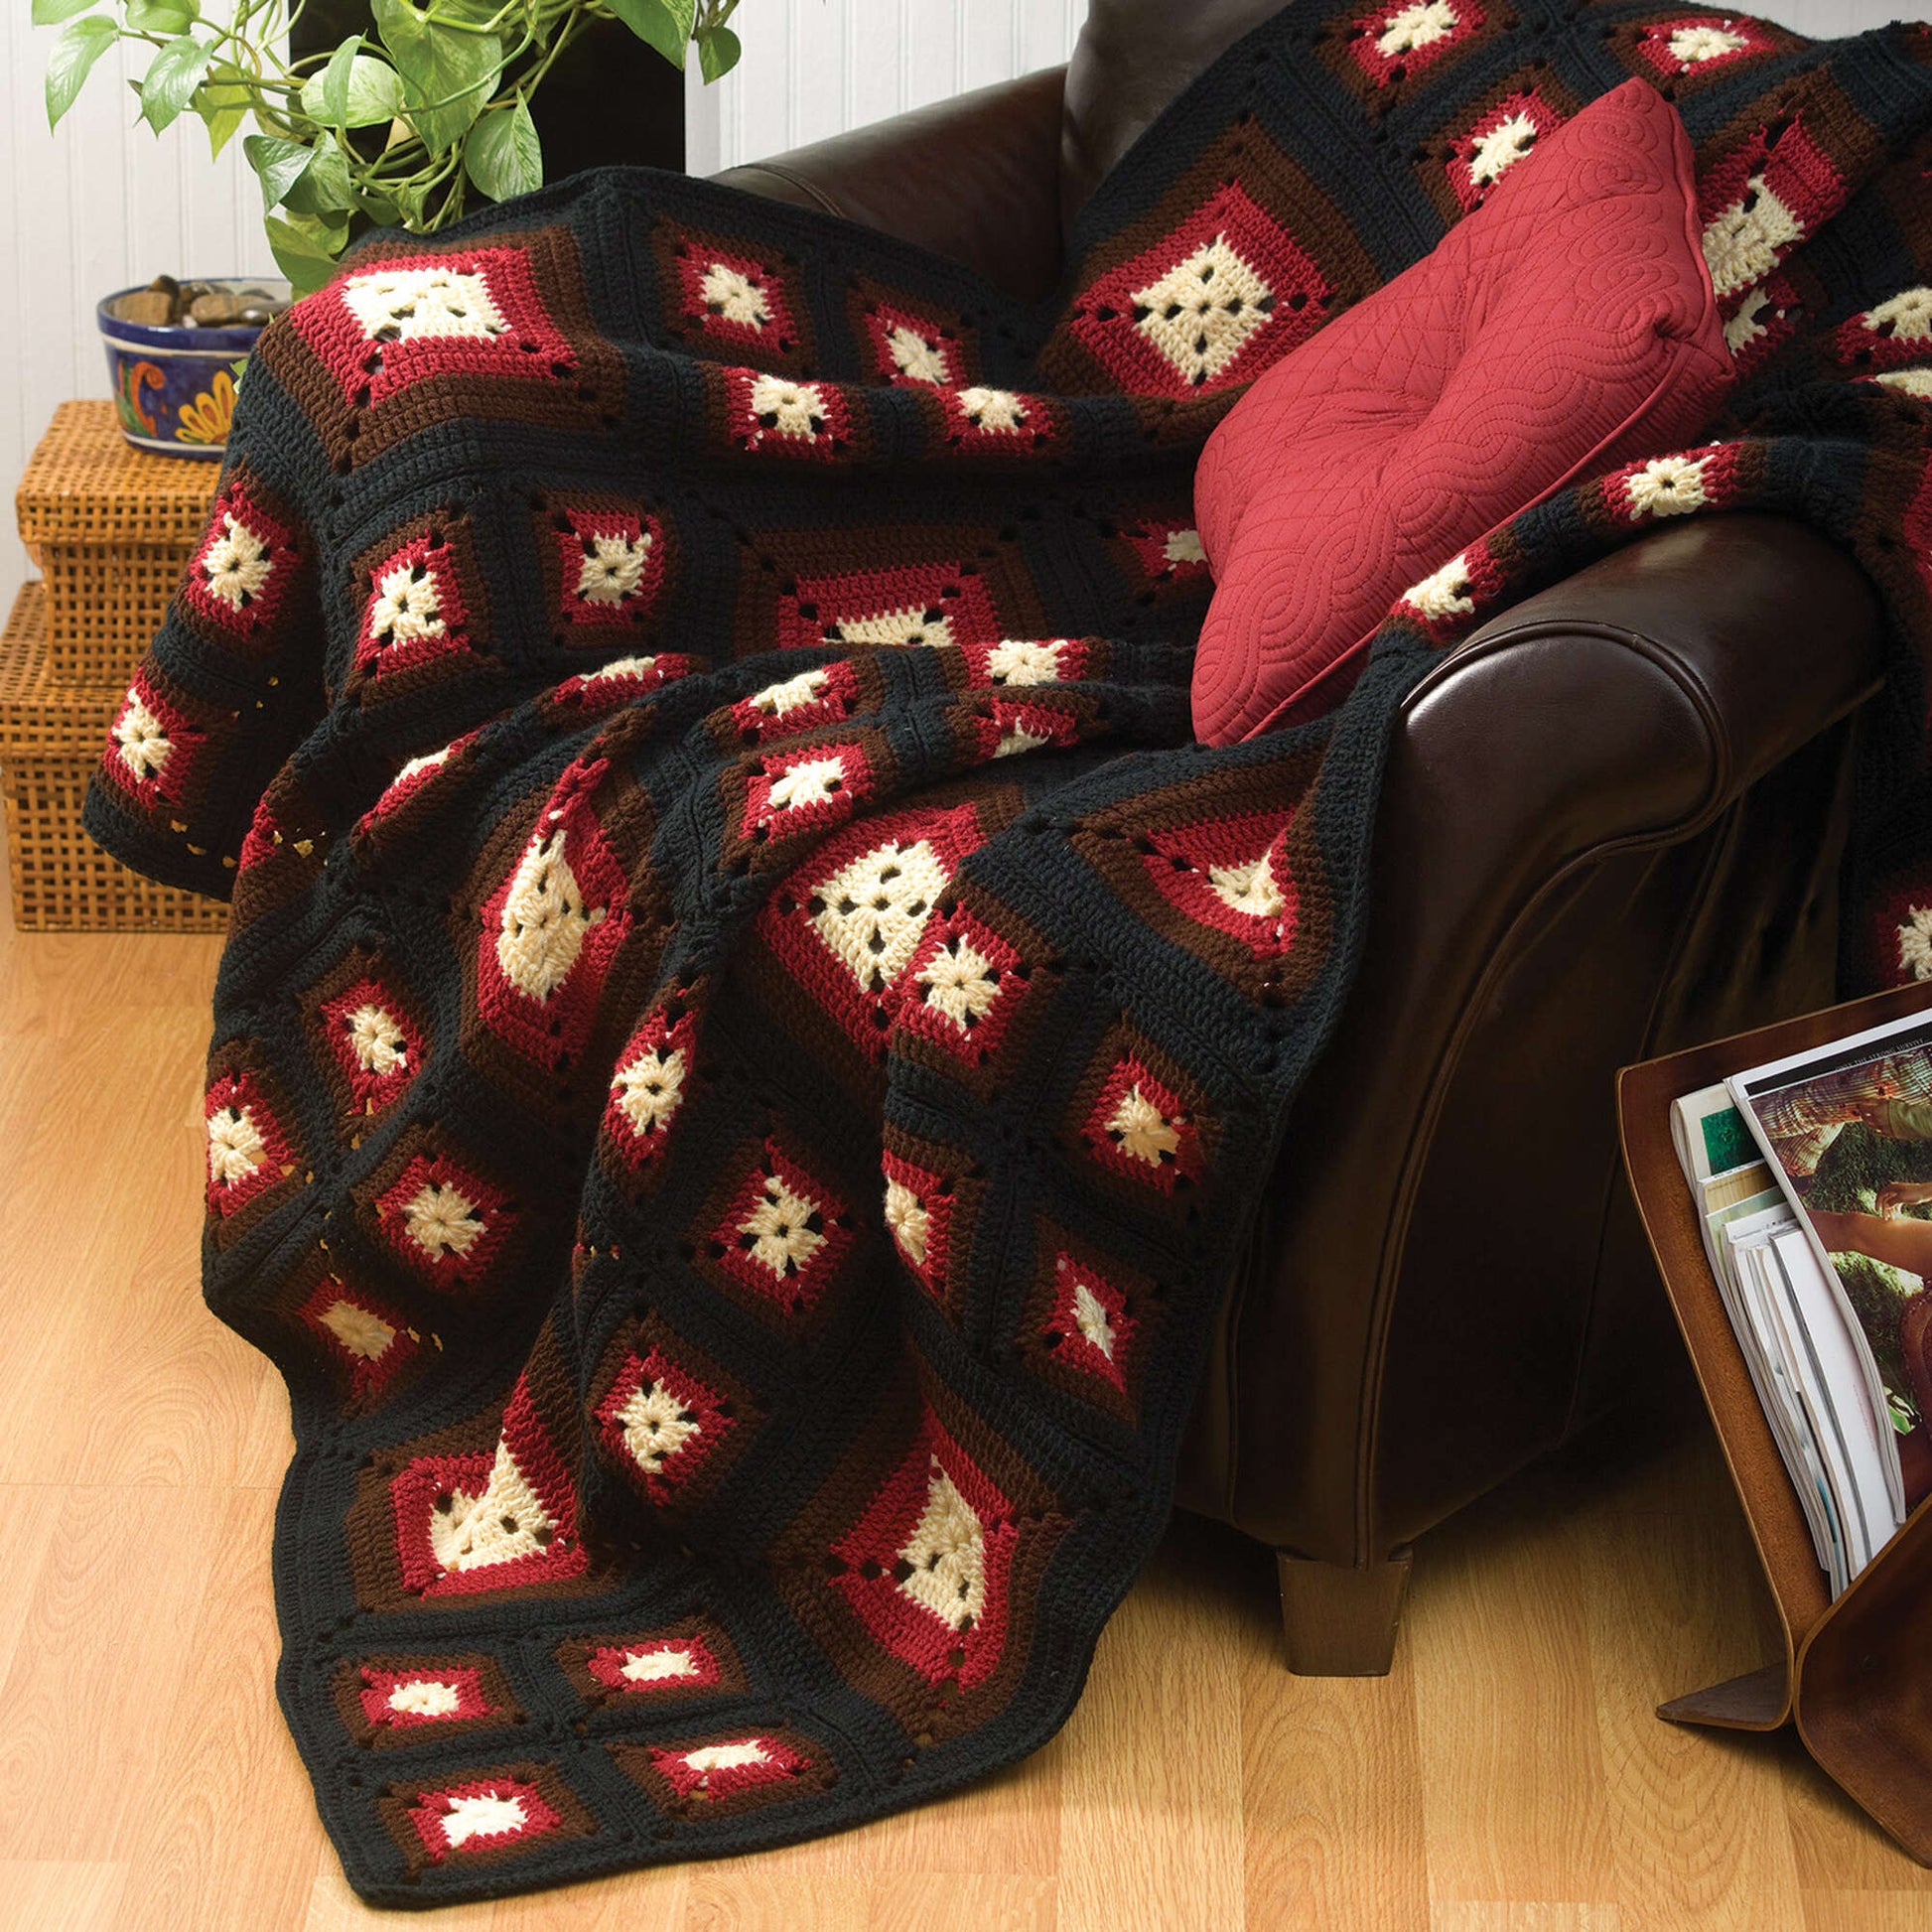 Free Caron Today's Granny Afghan Crochet Pattern